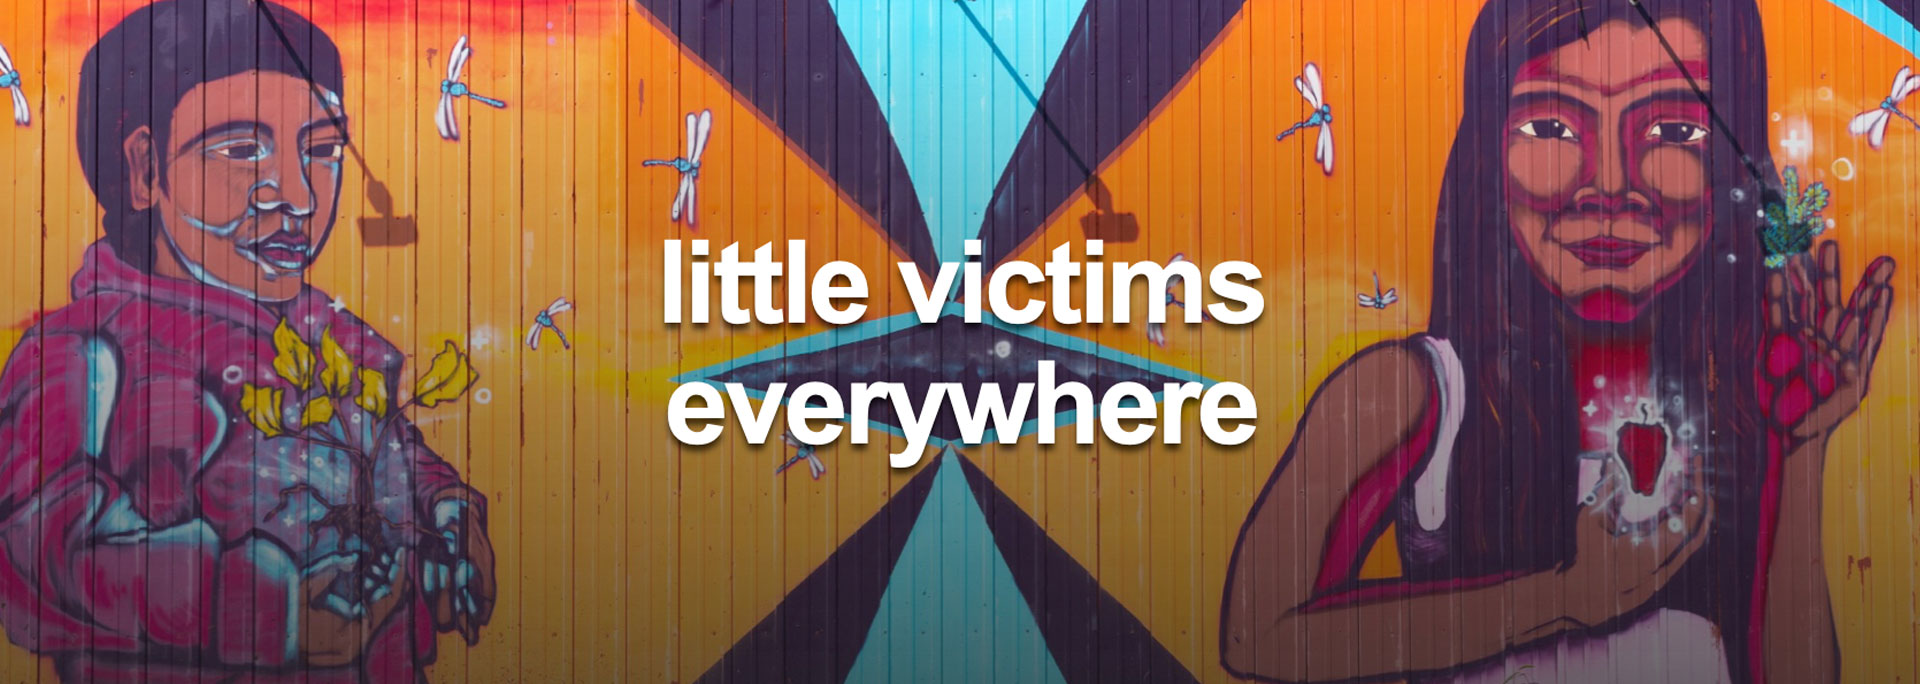 The Howard Center for Investigative Journalism’s investigation, “little victims everywhere,”